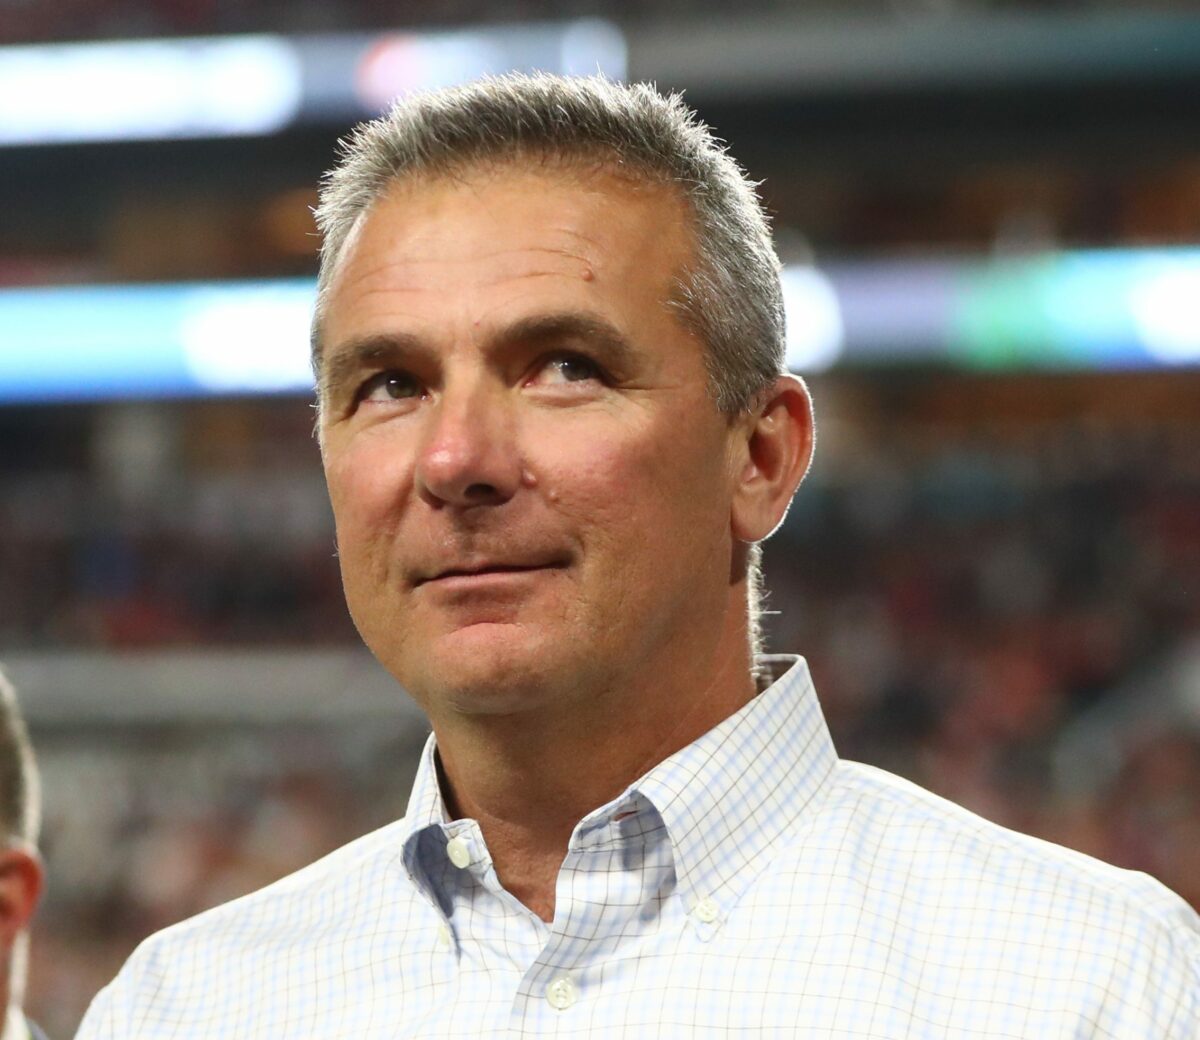 Watch: Urban Meyer shares memory of coaching at Notre Dame